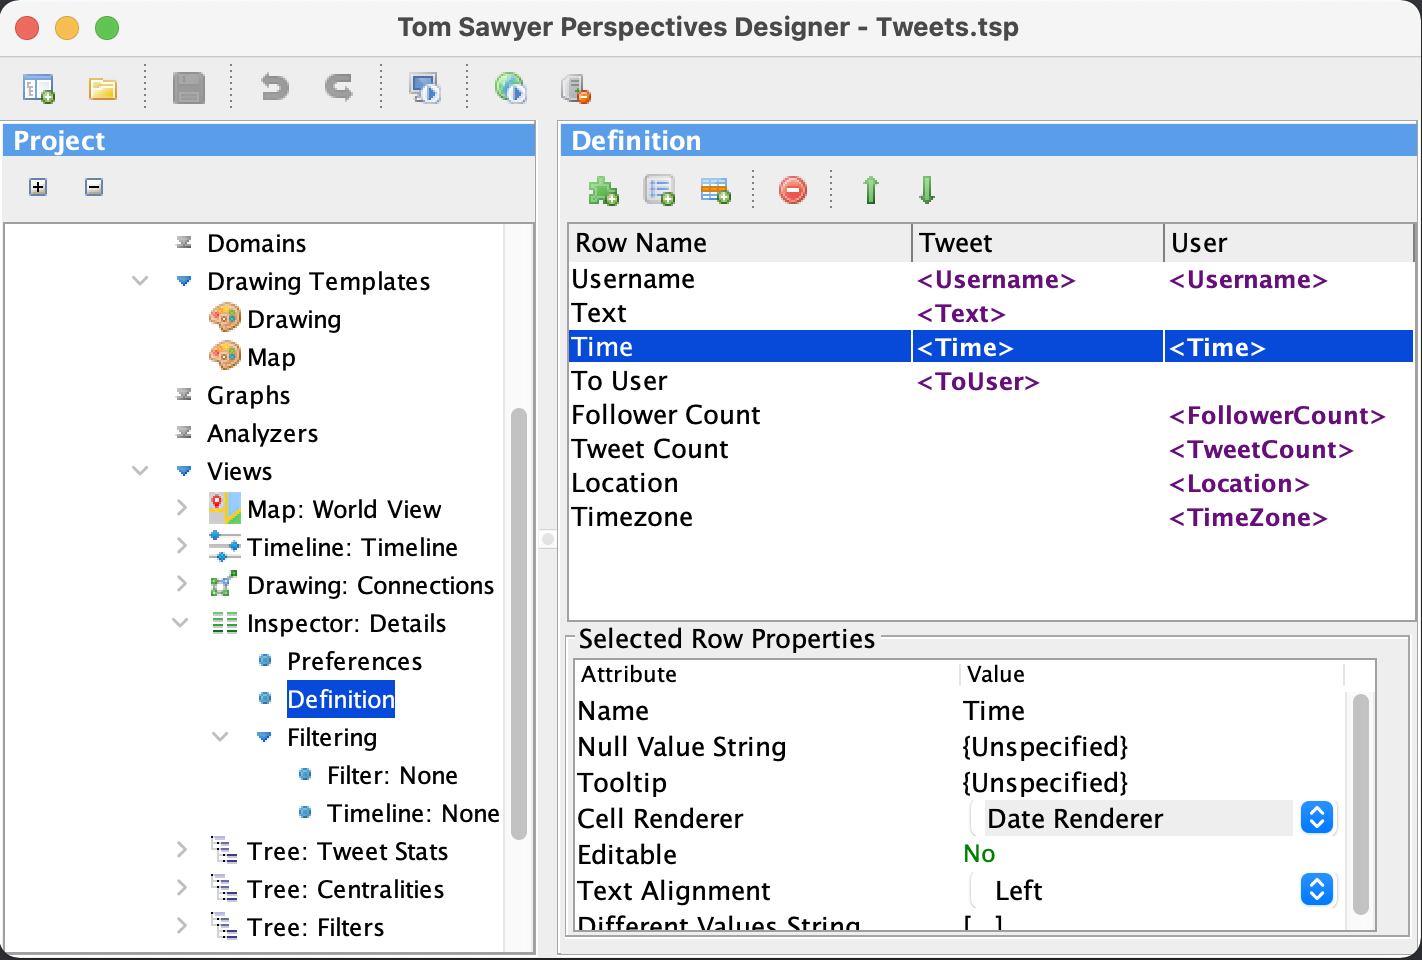 In Perspectives 10.0, the Designer dynamically configures any filtering in the Inspector view.